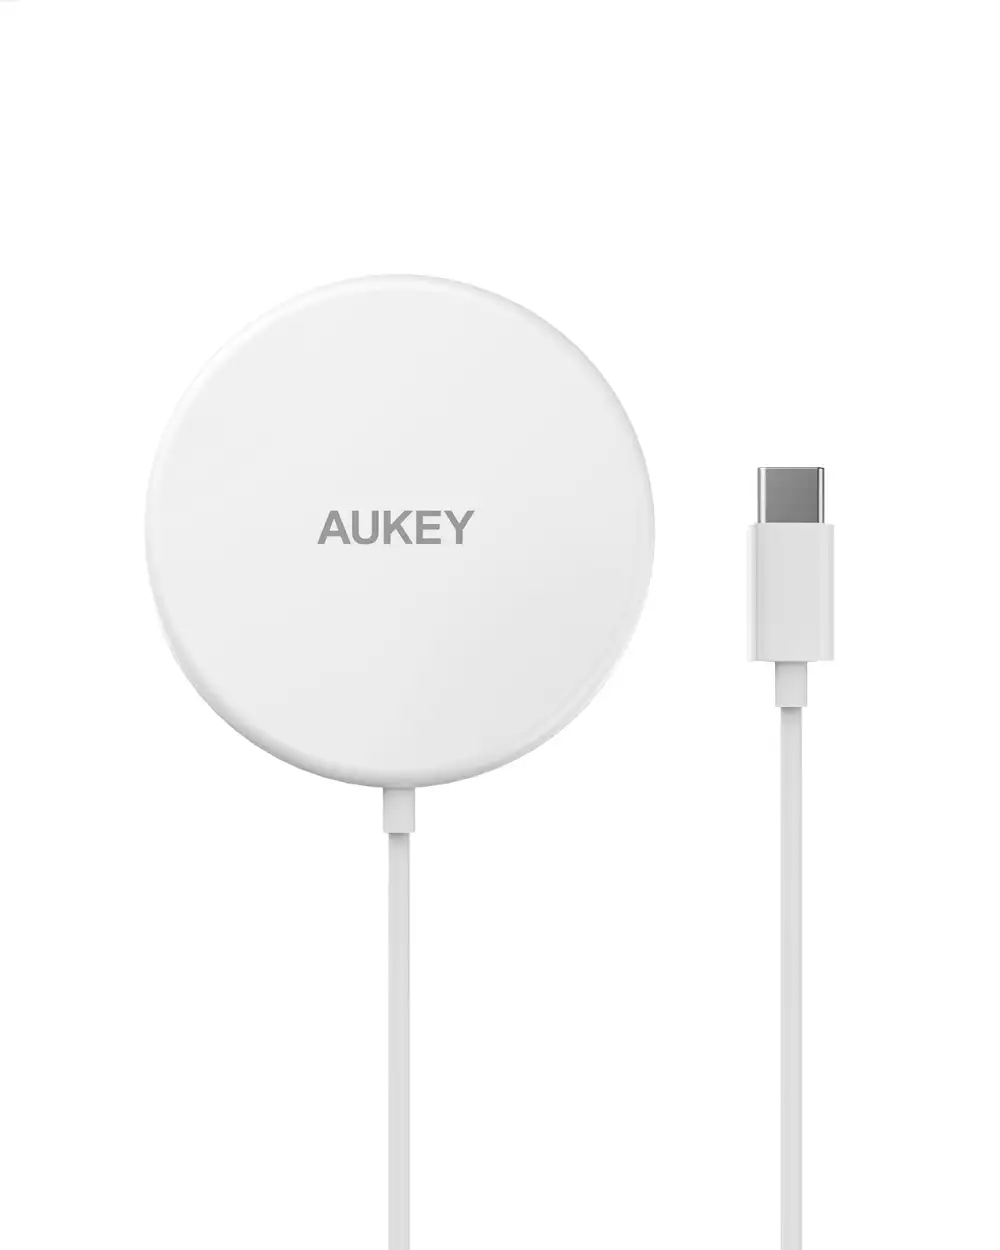 AUKEY LC-A1 Aircore Wireless Charger 15W Magnetic Qi Certified